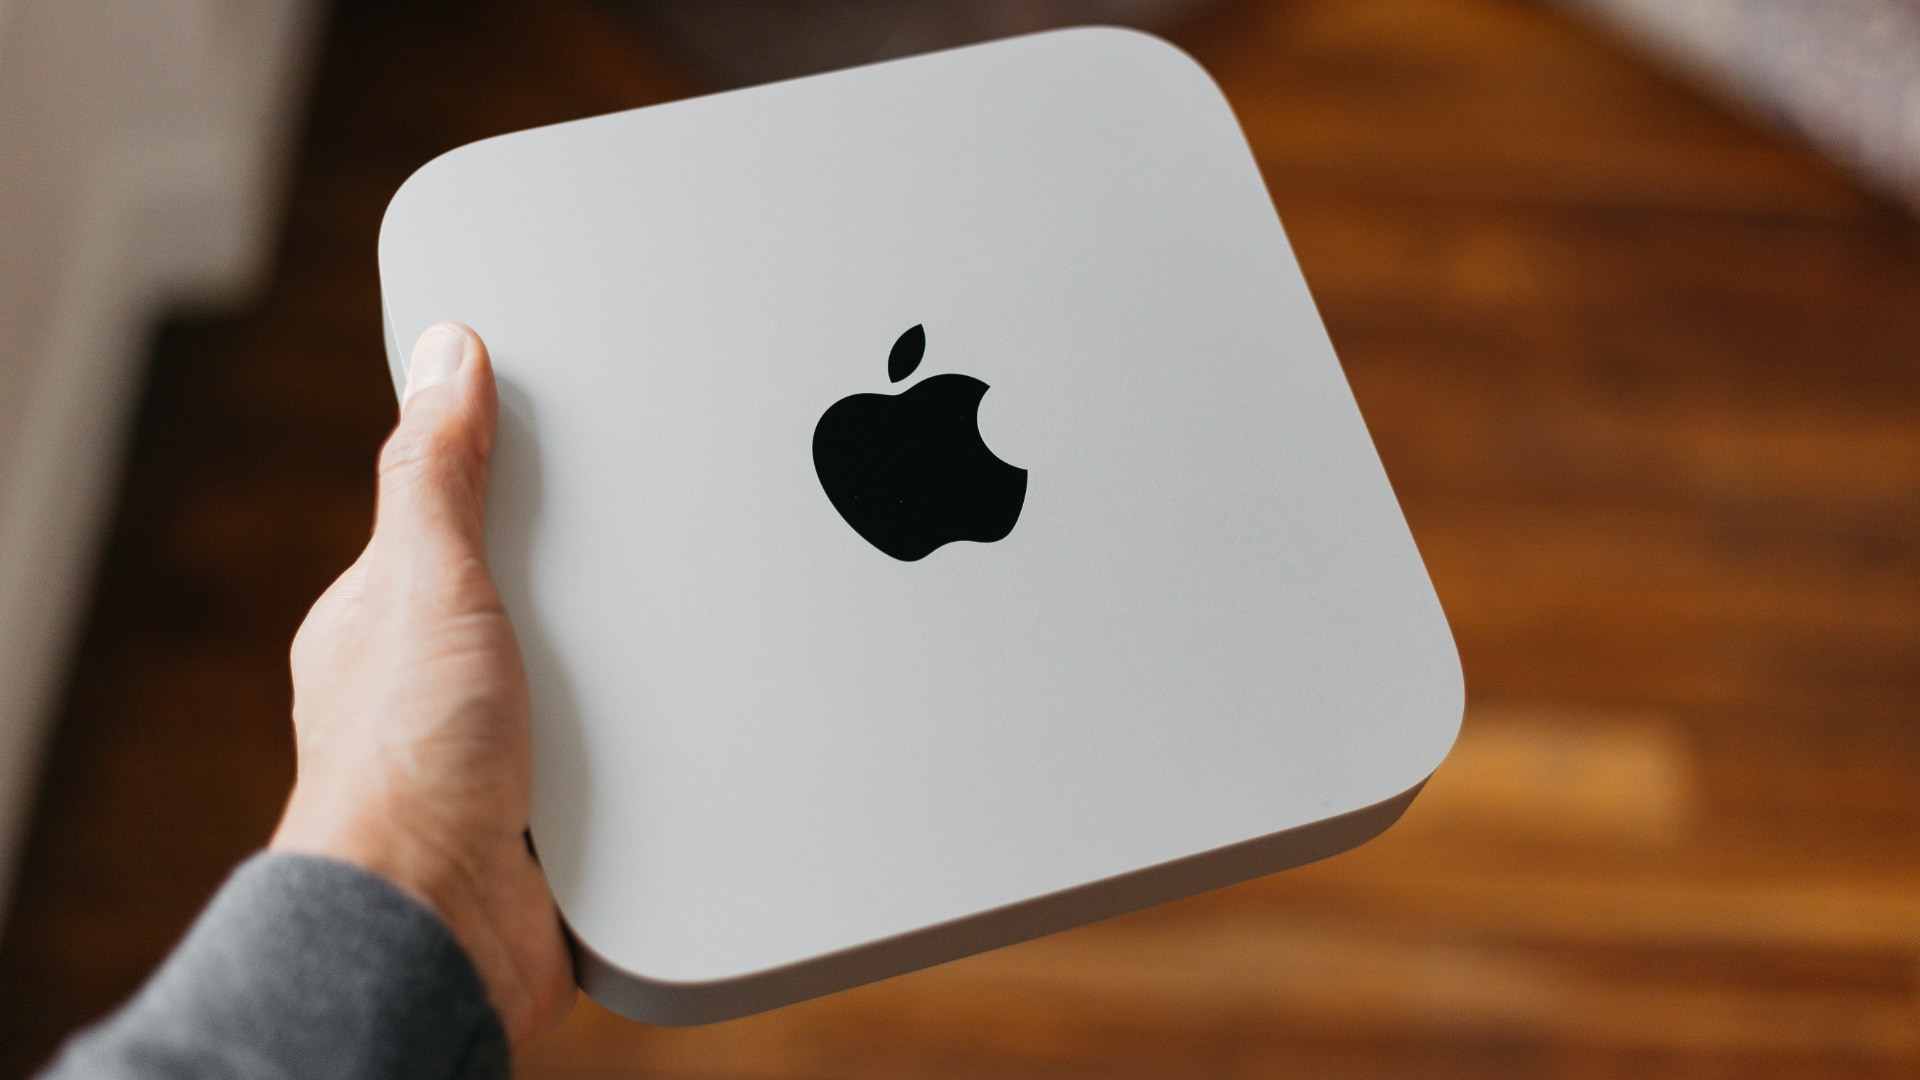 Apple now offering refurbished M2 Mac mini models at modest discounts